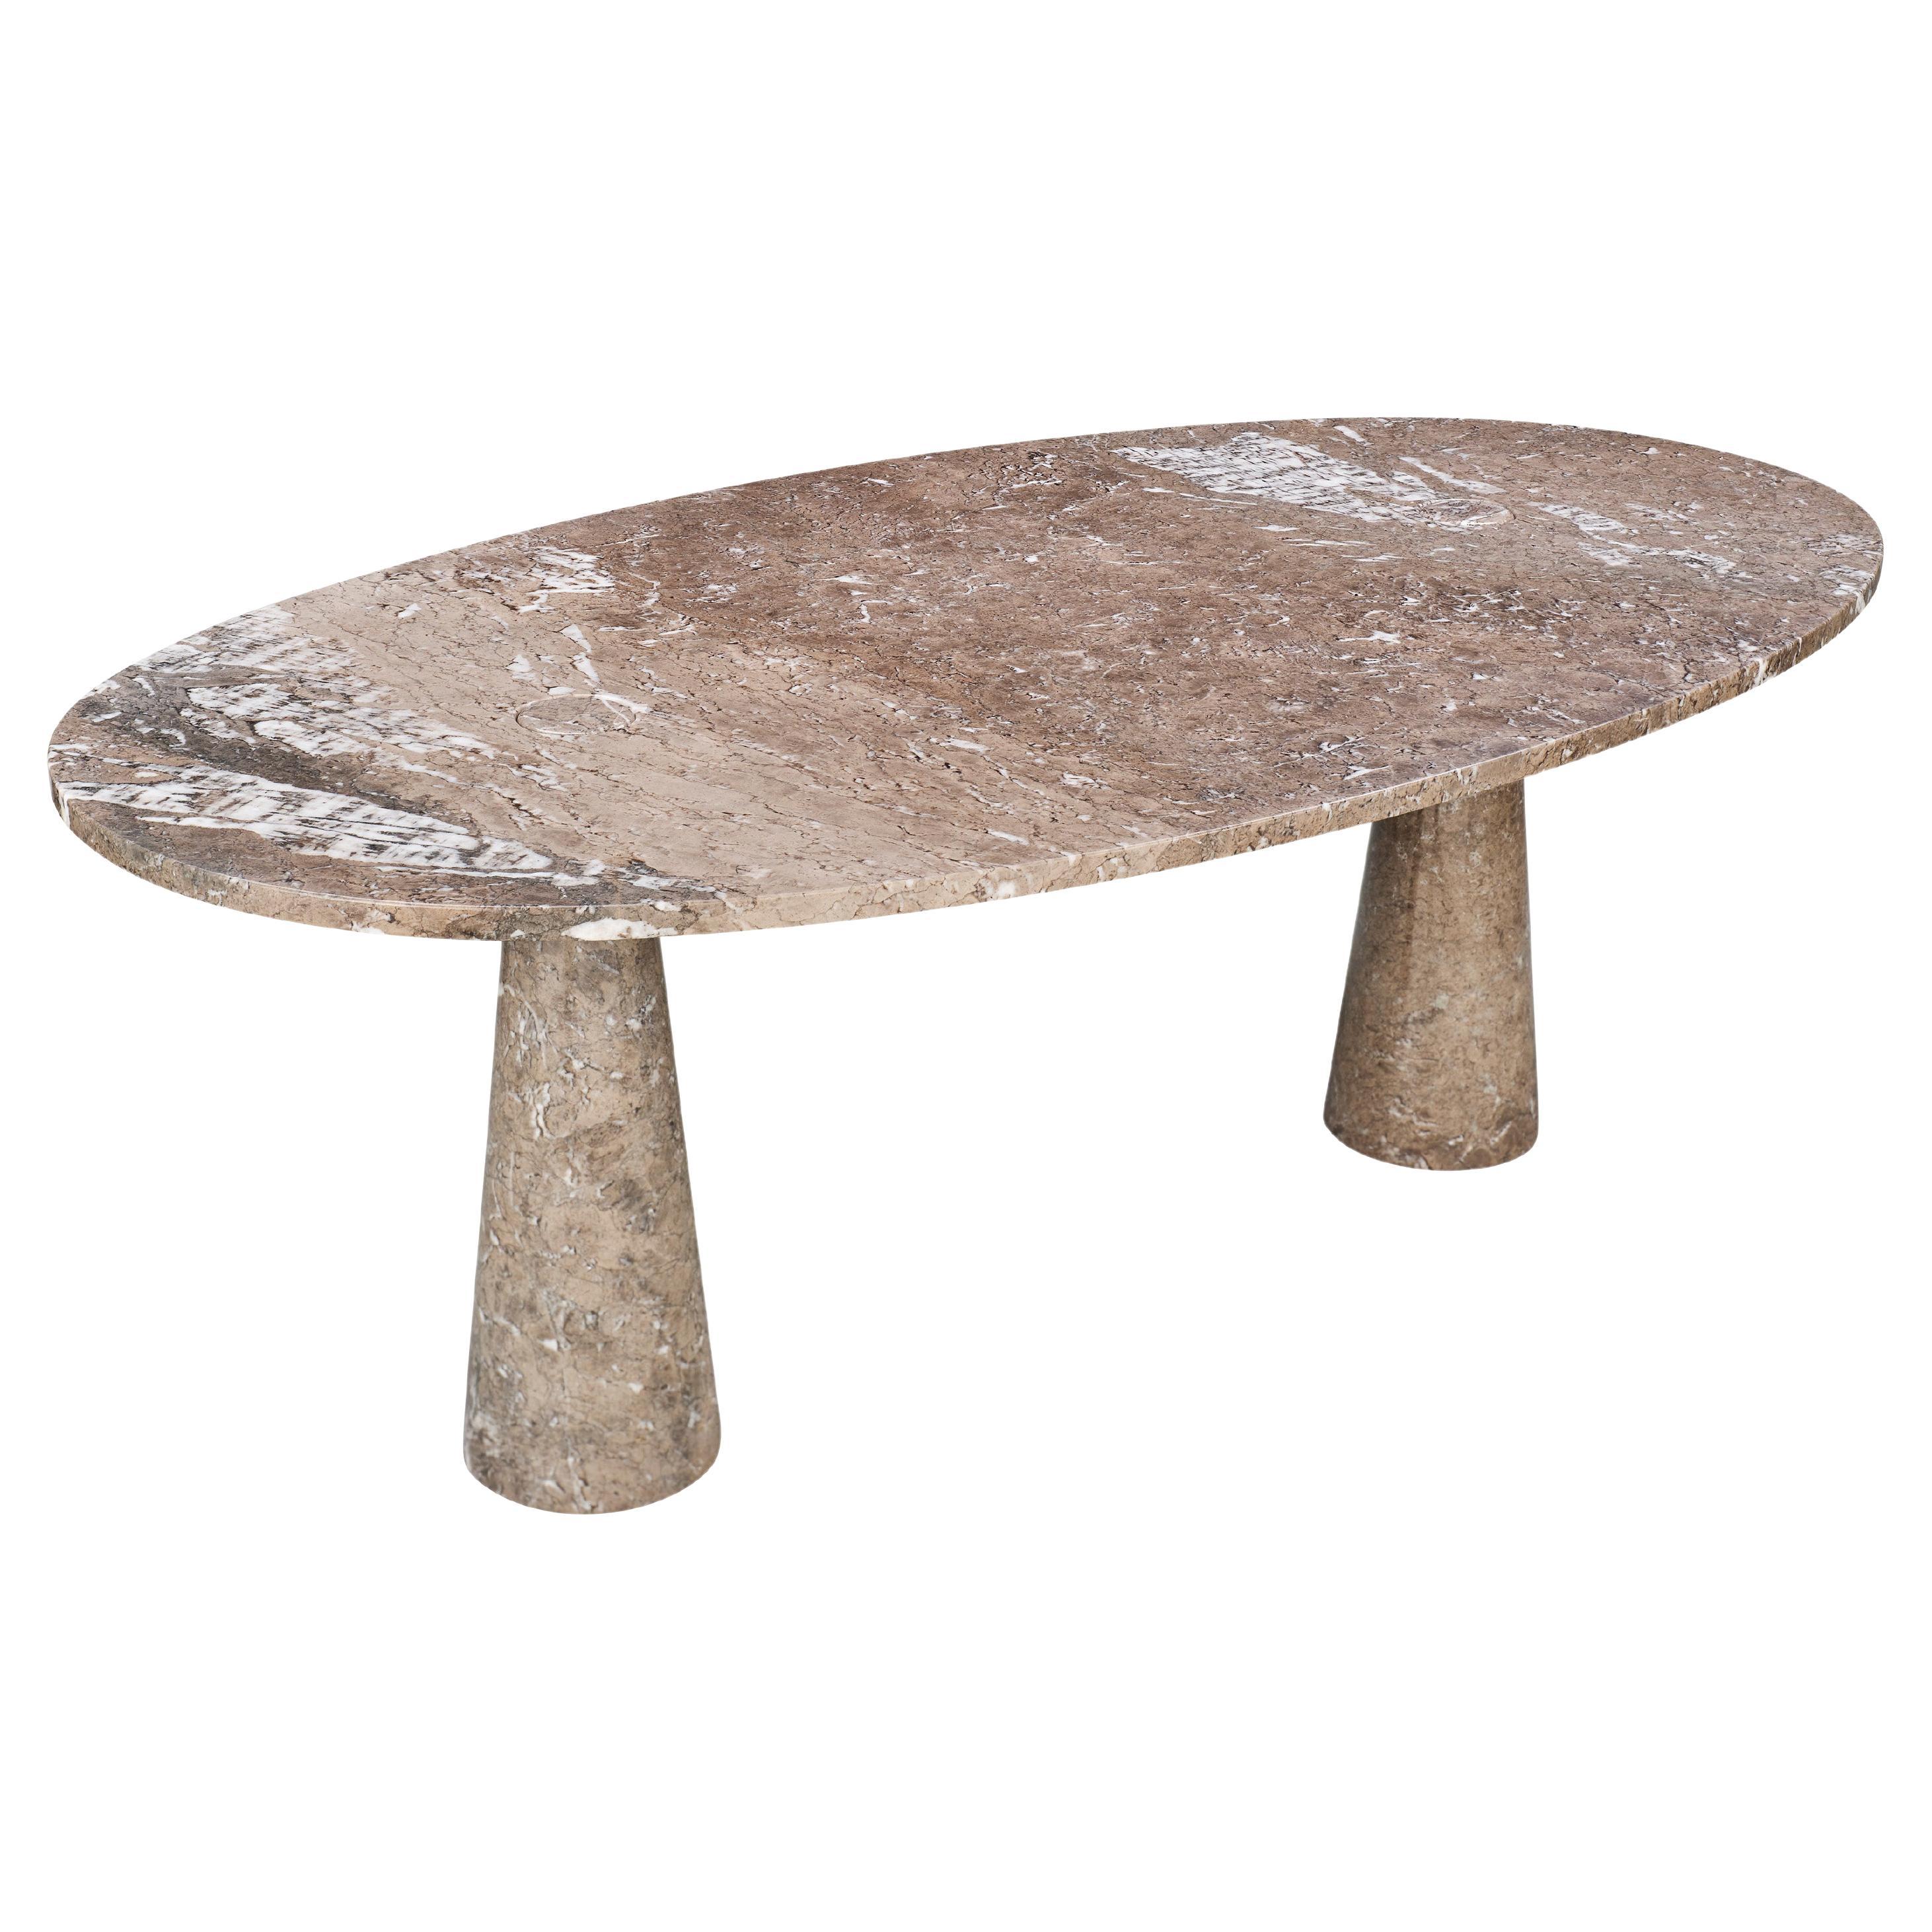 Angelo Mangiarotti for Skipper "Eros" Dining Table For Sale